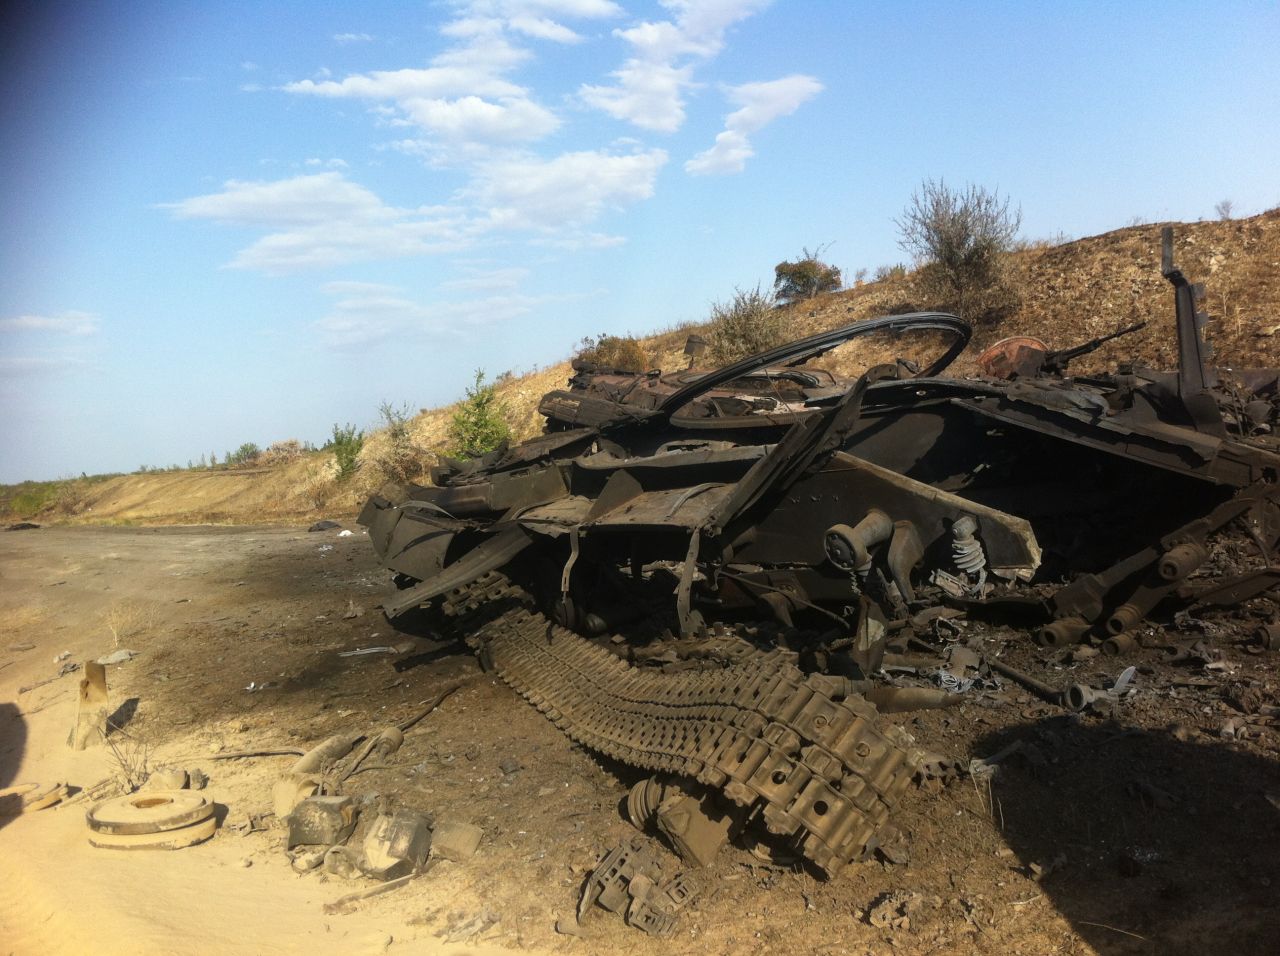 Burnt-out military vehicles litter the countryside in eastern Ukraine, including this example pictured on Tuesday September 2, 2014.